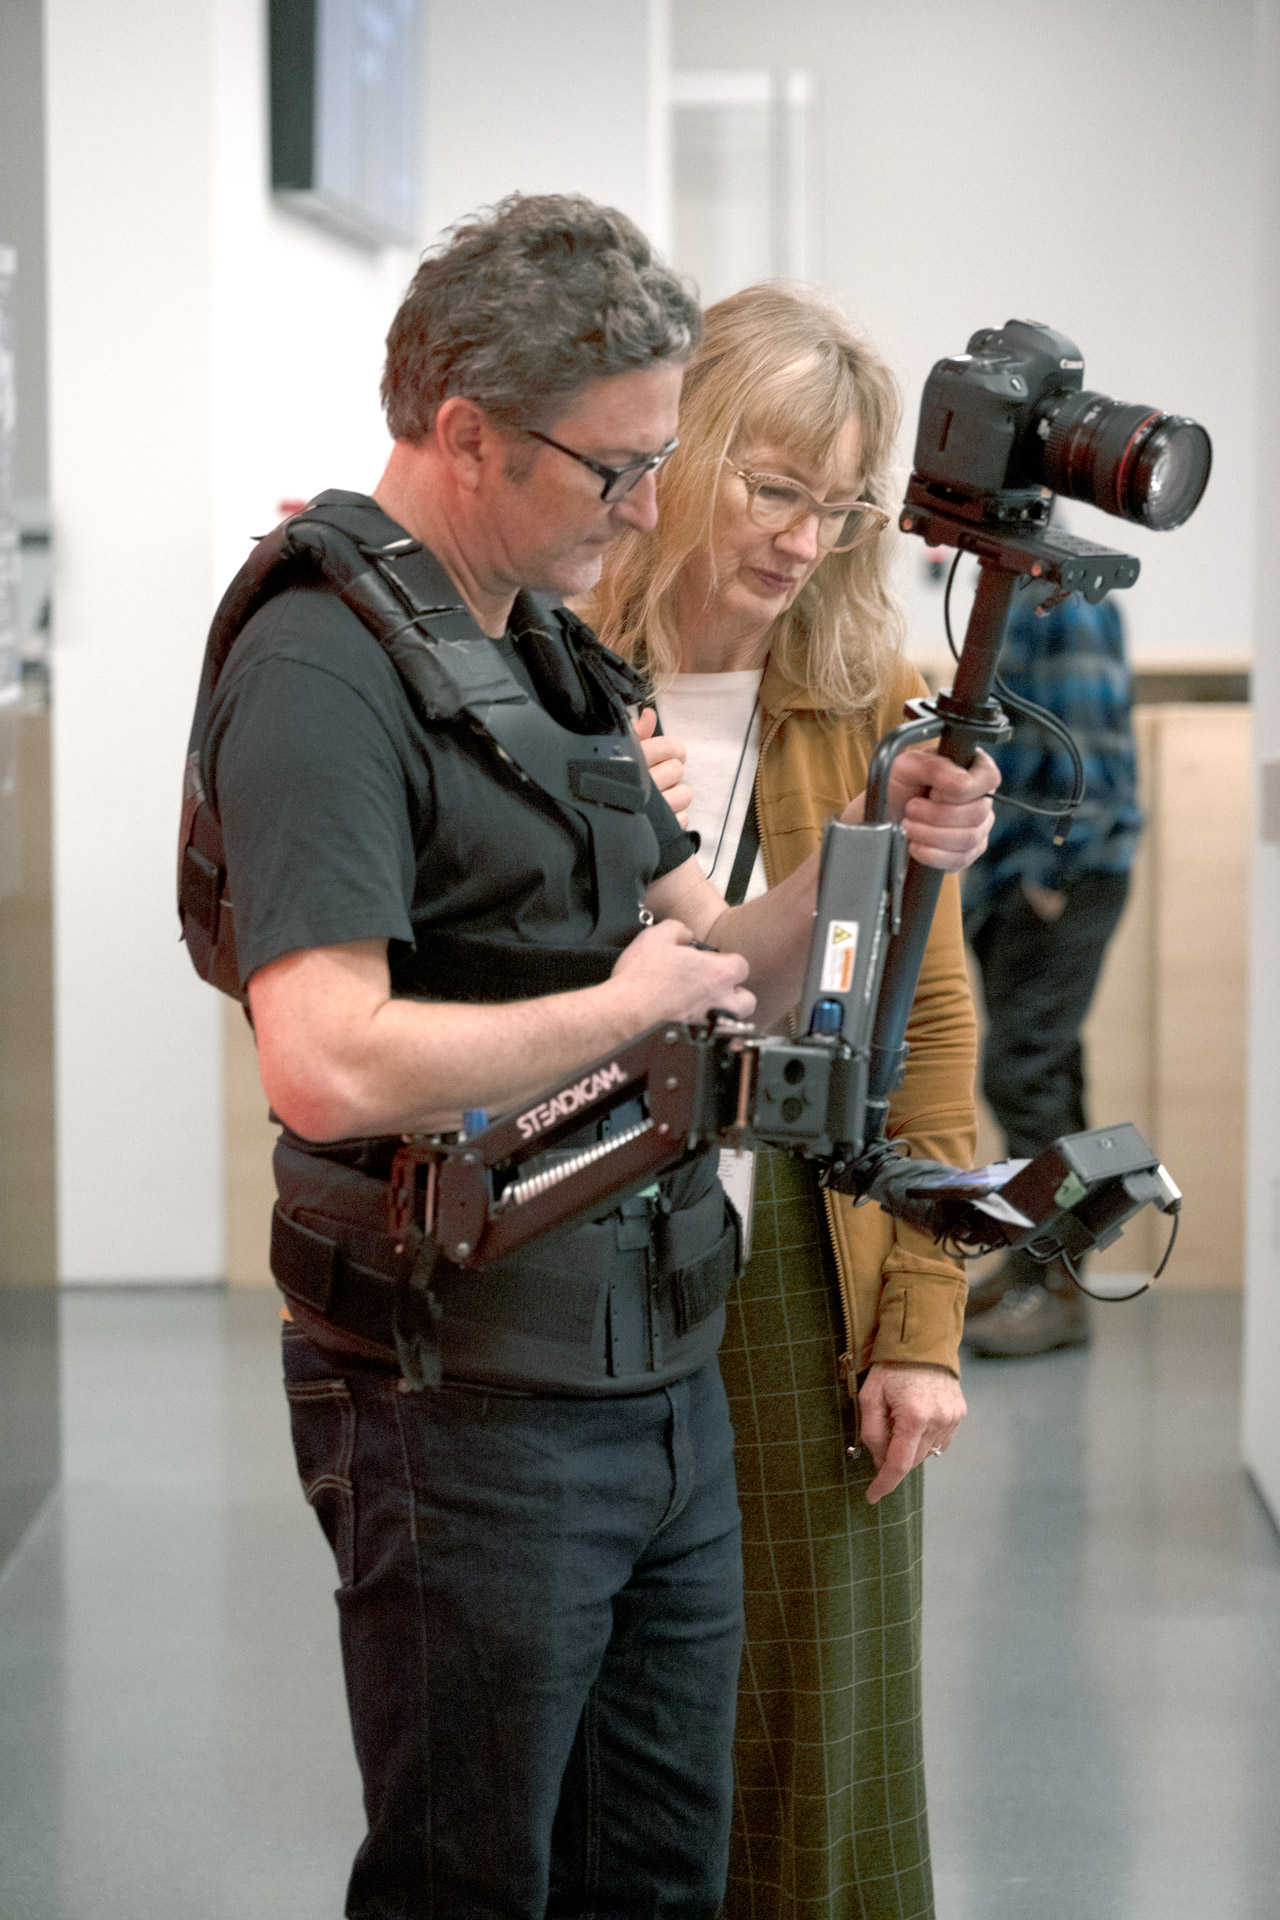 Photo of artists Janet Cardiff and George Bures Miller holding a camera